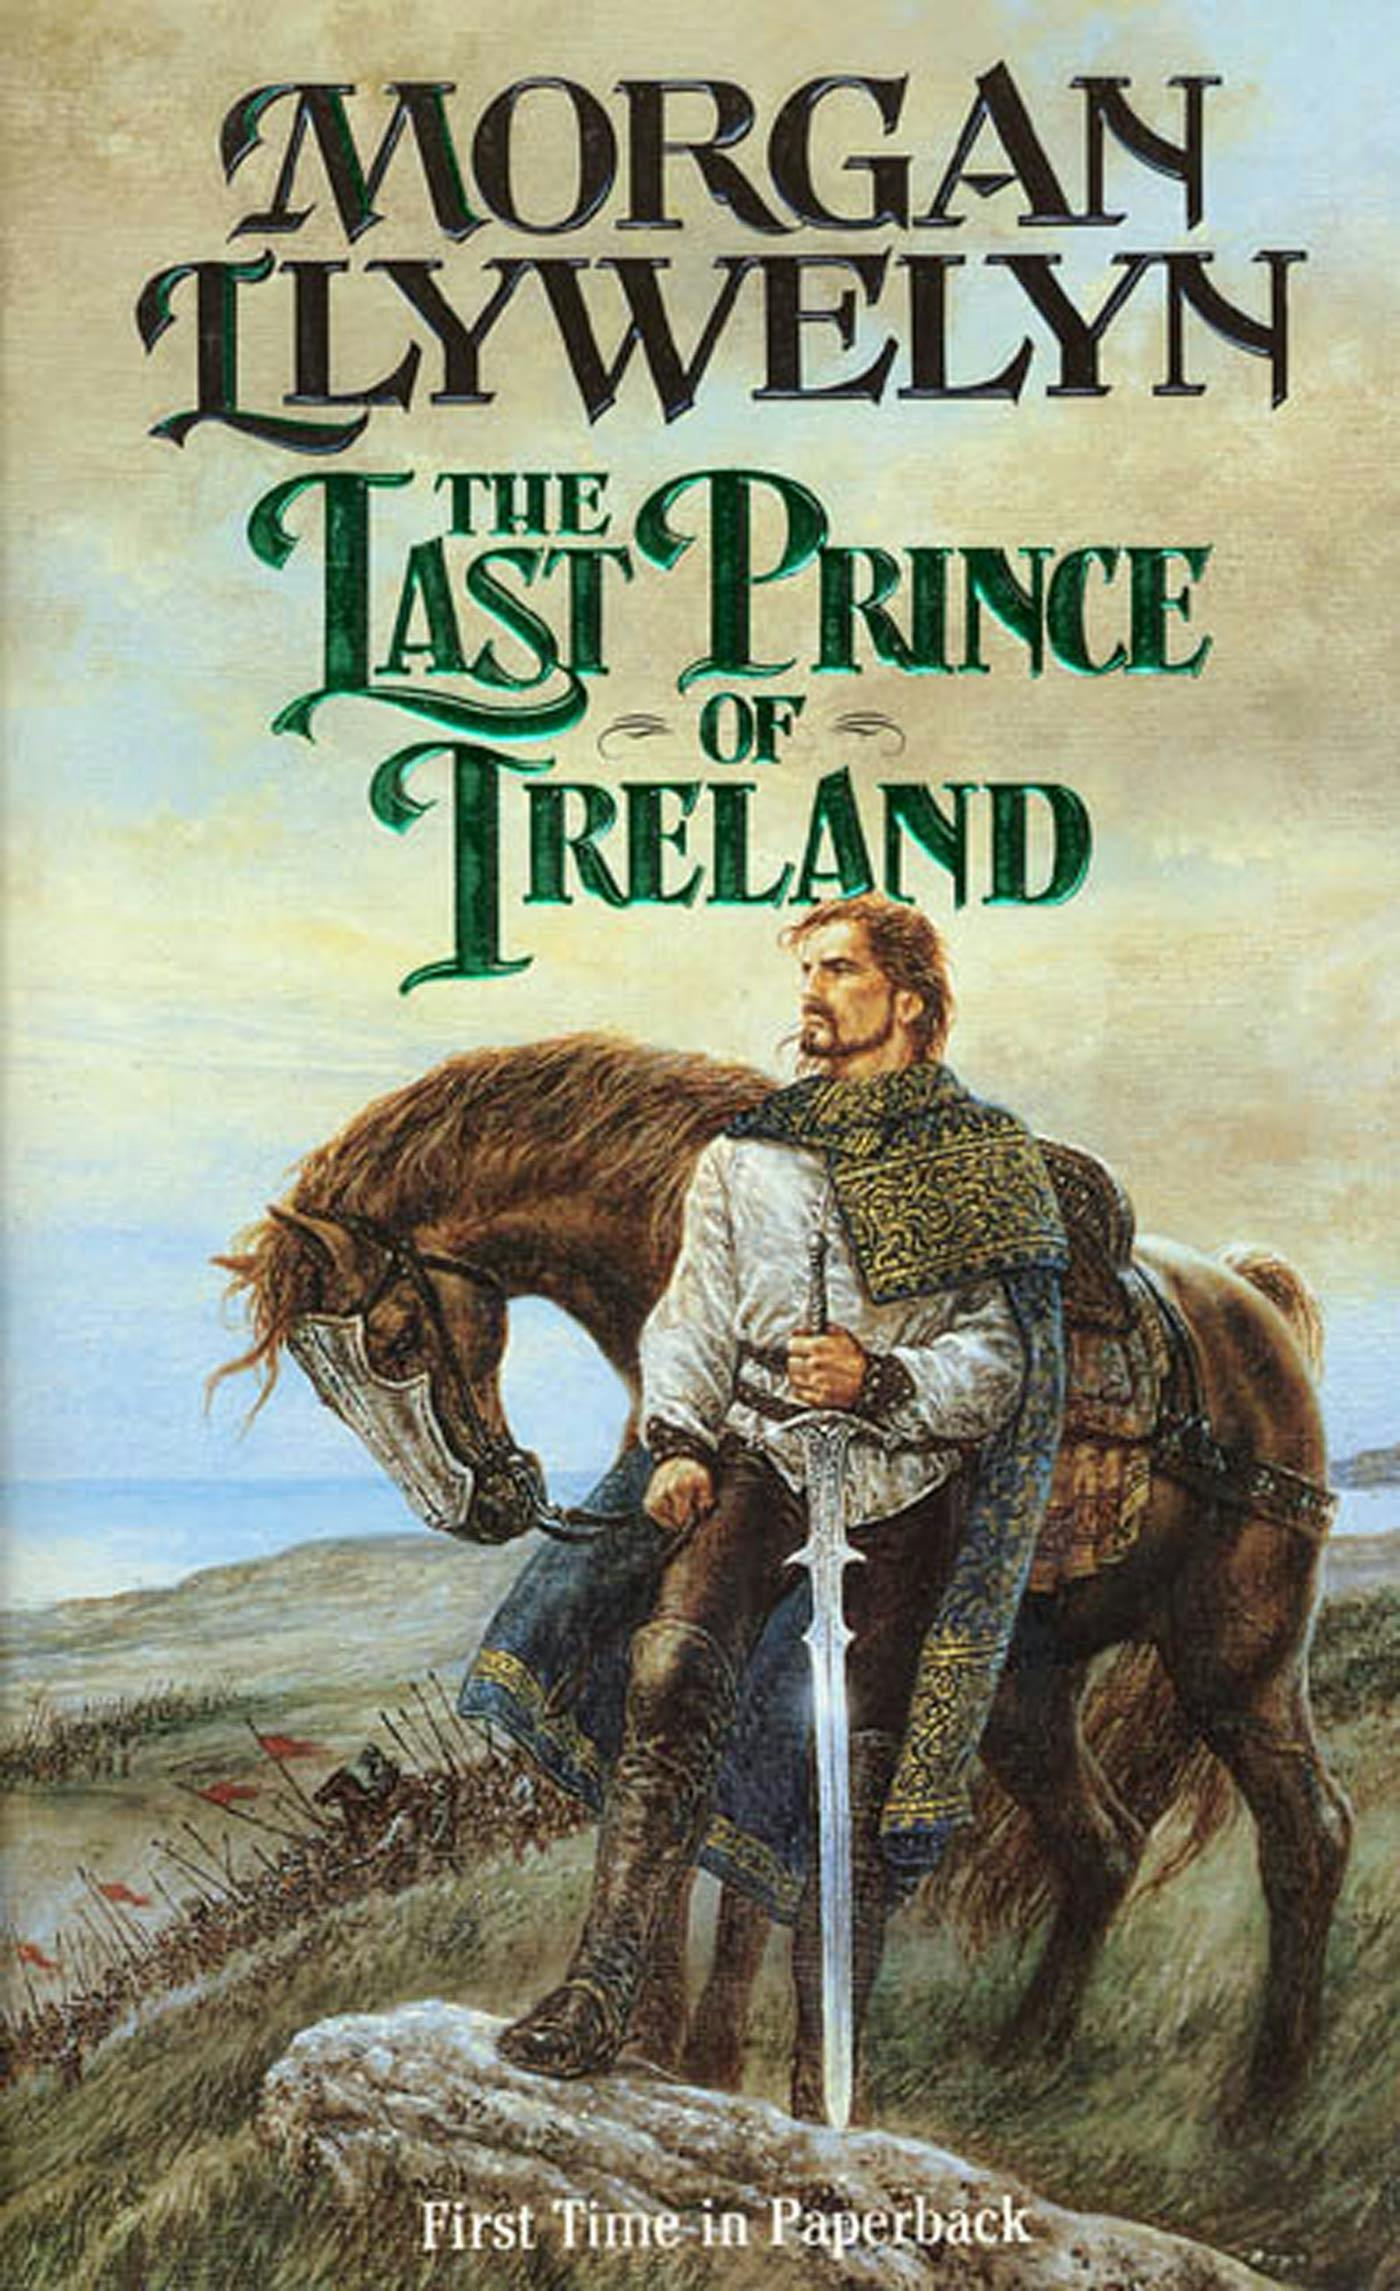 Cover for the book titled as: The Last Prince of Ireland